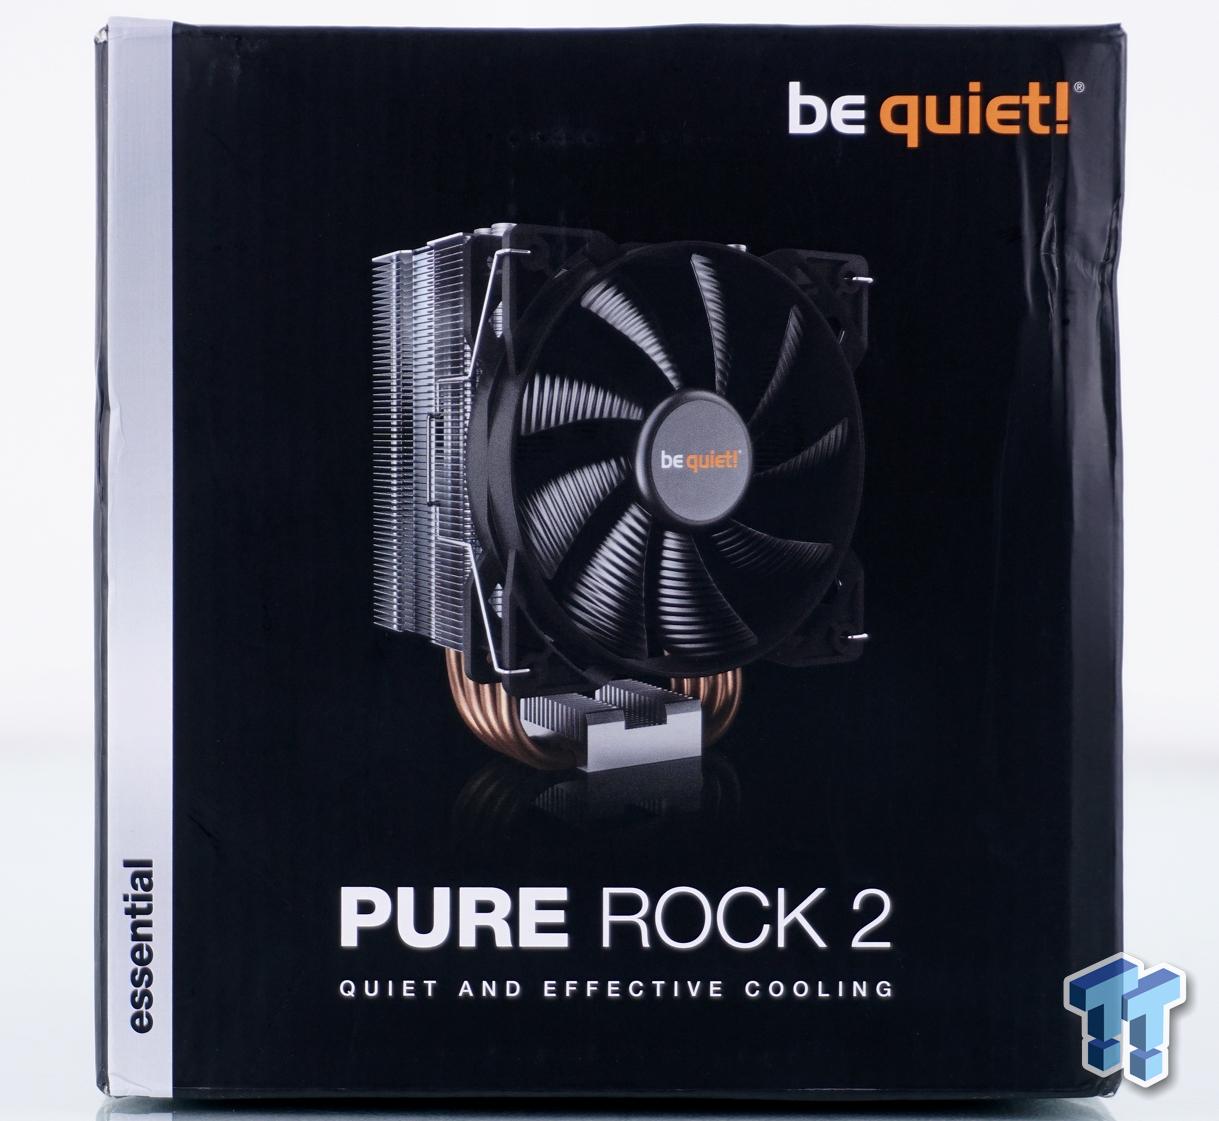 be quiet! Pure Rock CPU Cooler 2 Review